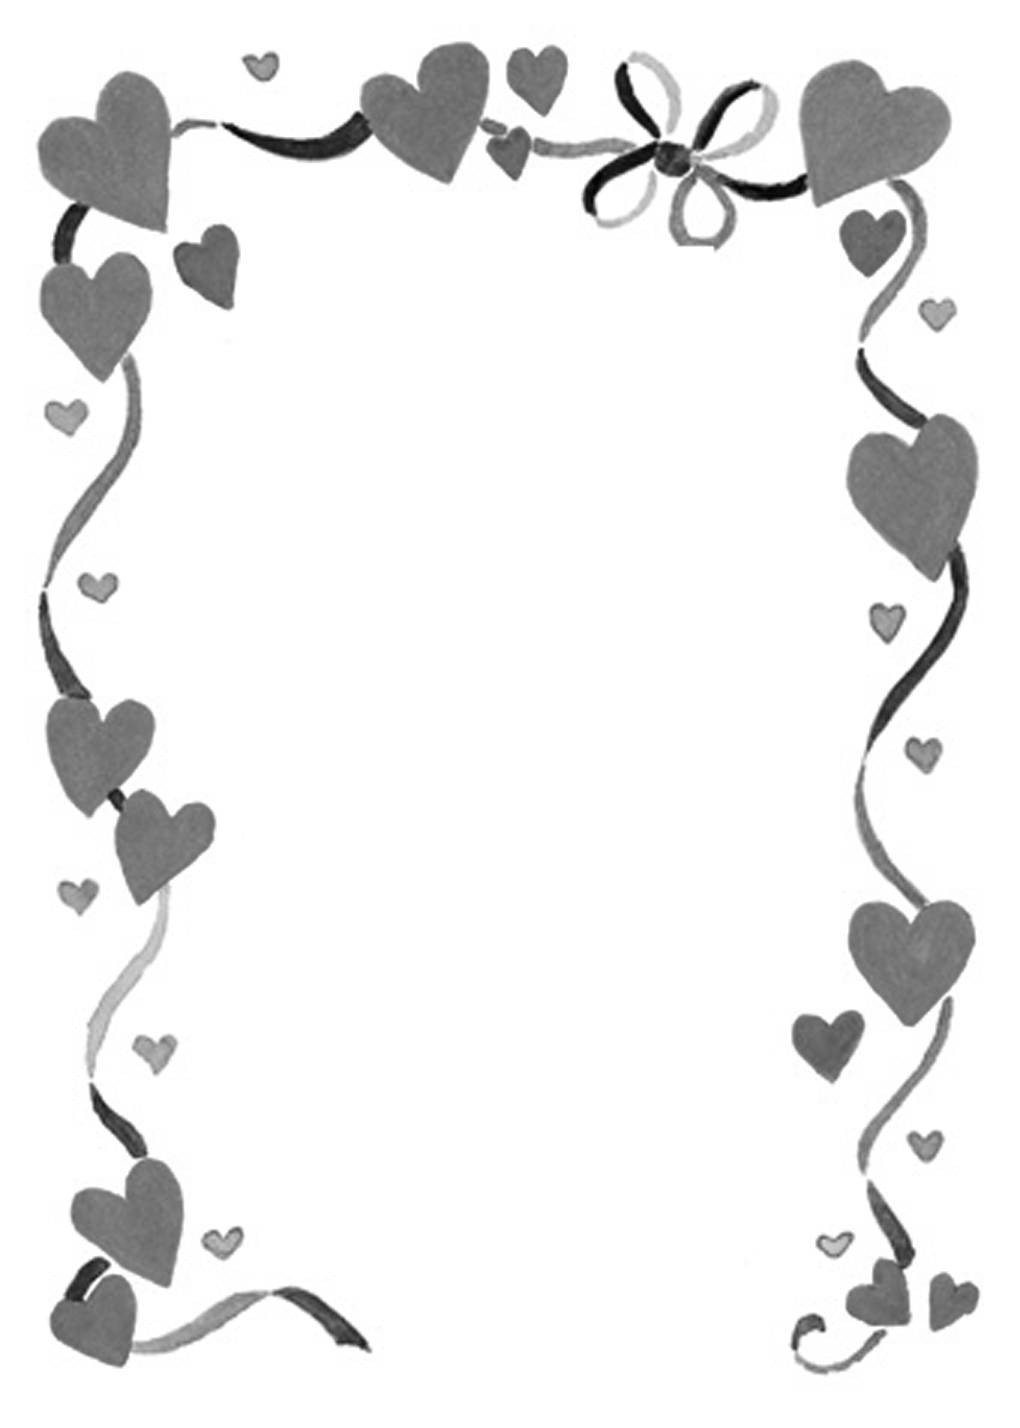 Free Clip Art Borders Wedding | Clipart library - Free Clipart Images